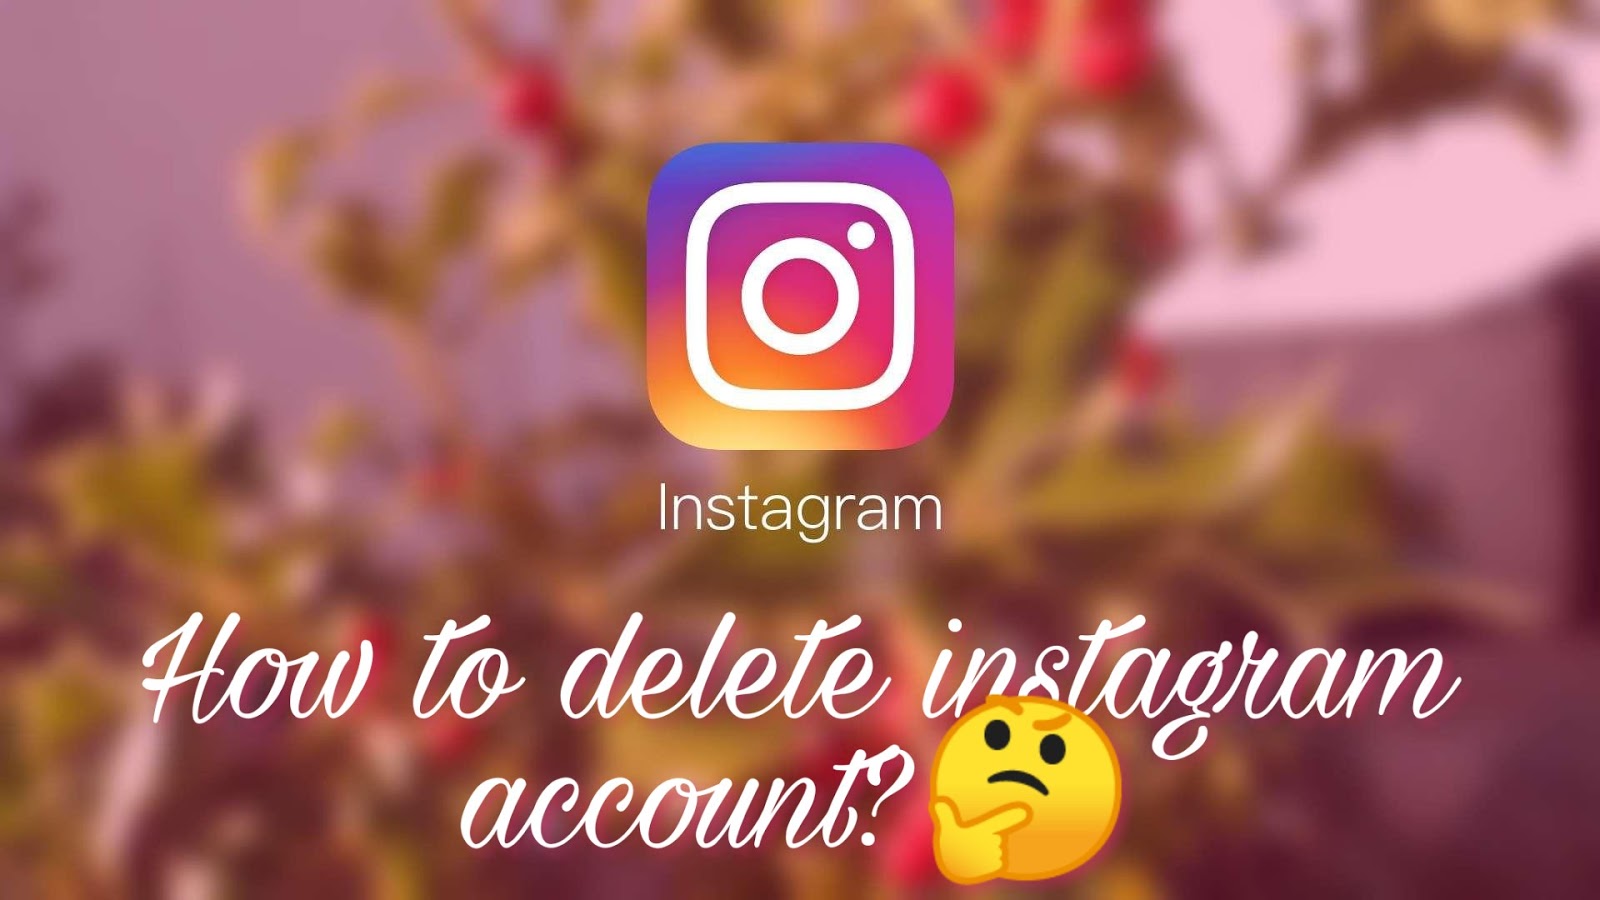 How To Delete Instagram Account Permanently 30? - The Technology